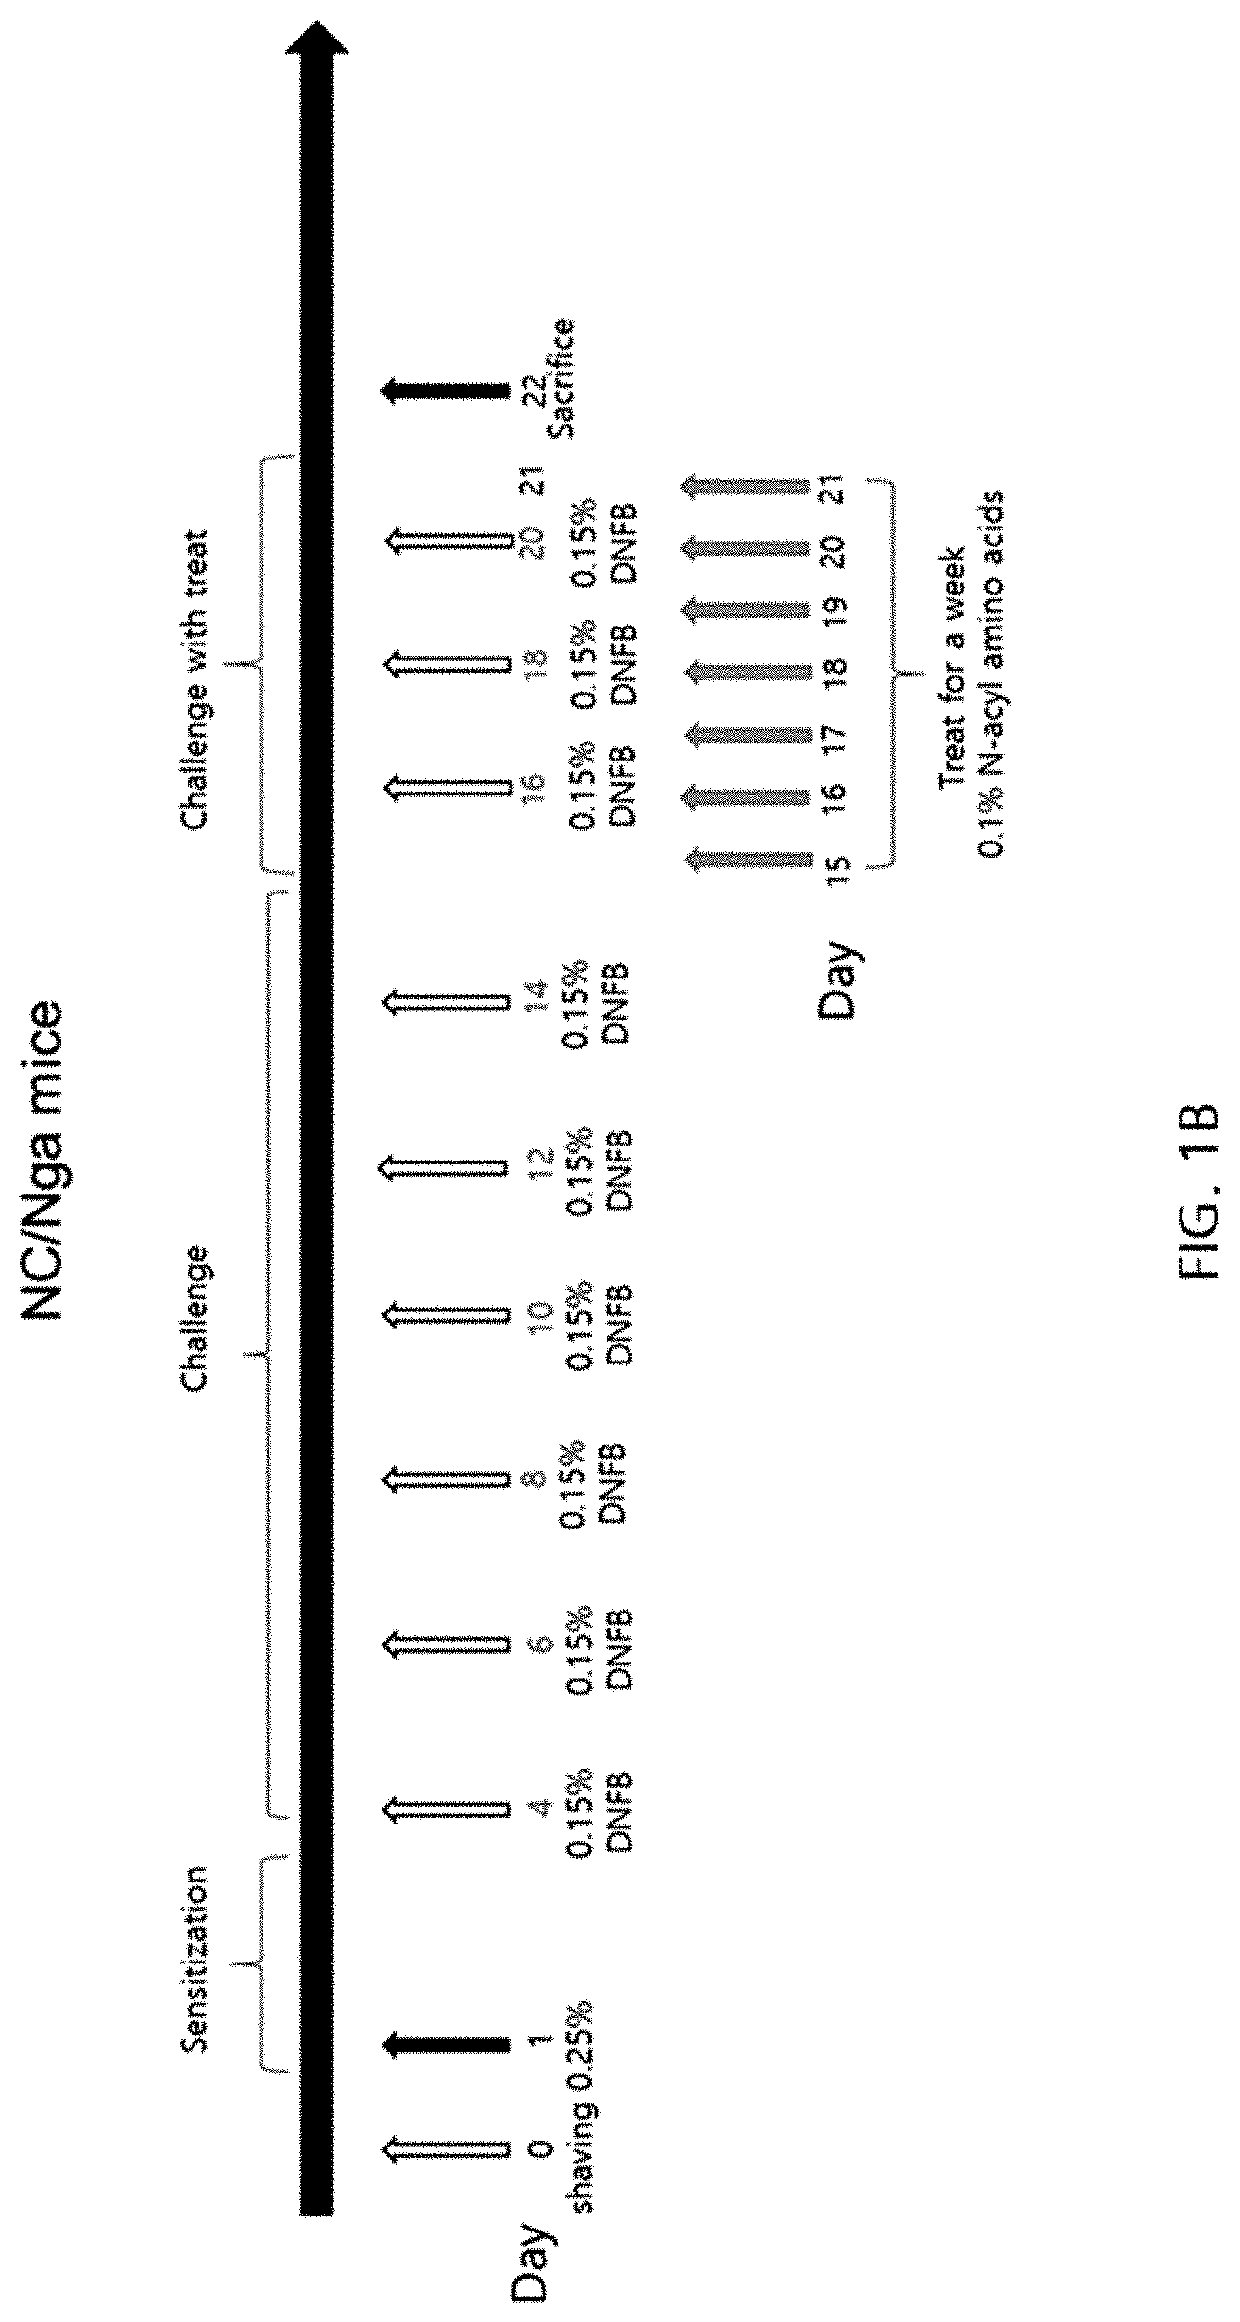 Composition for treating atopy or pruritus containing n-acetyl or n-acylamino acid